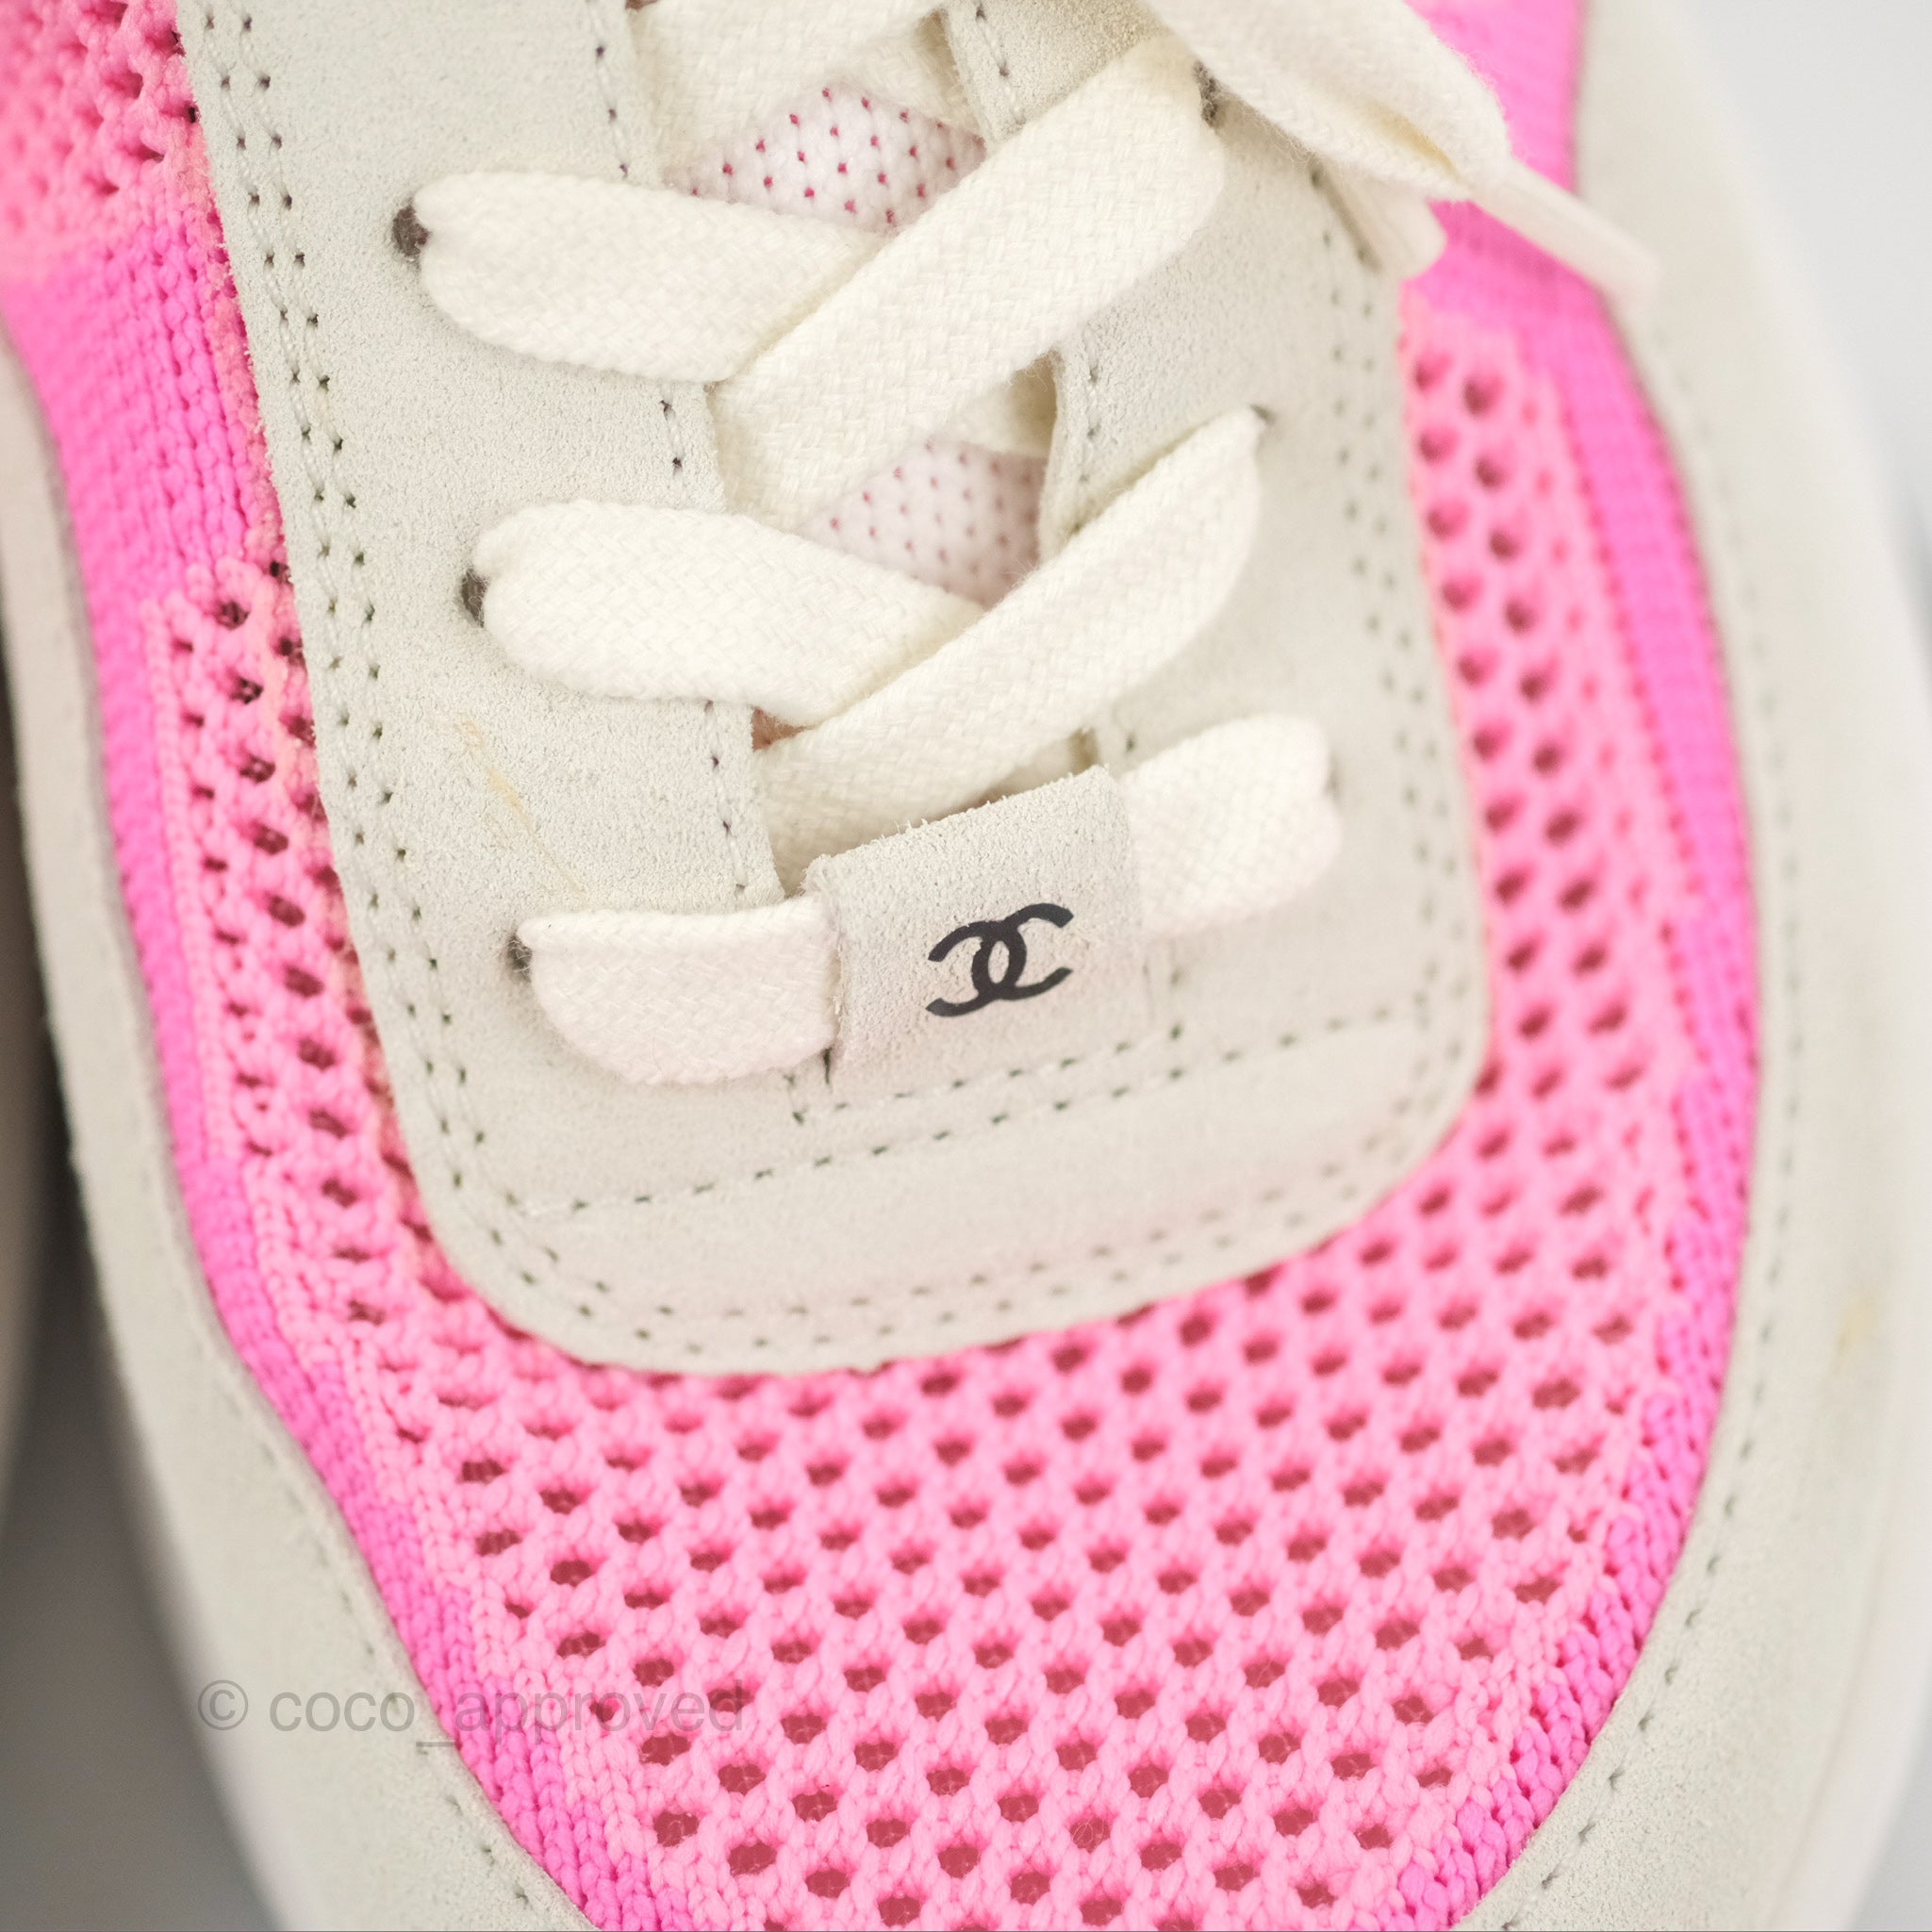 CHANEL 2020 Pink Fabric Perforated Sneakers 37.5 7